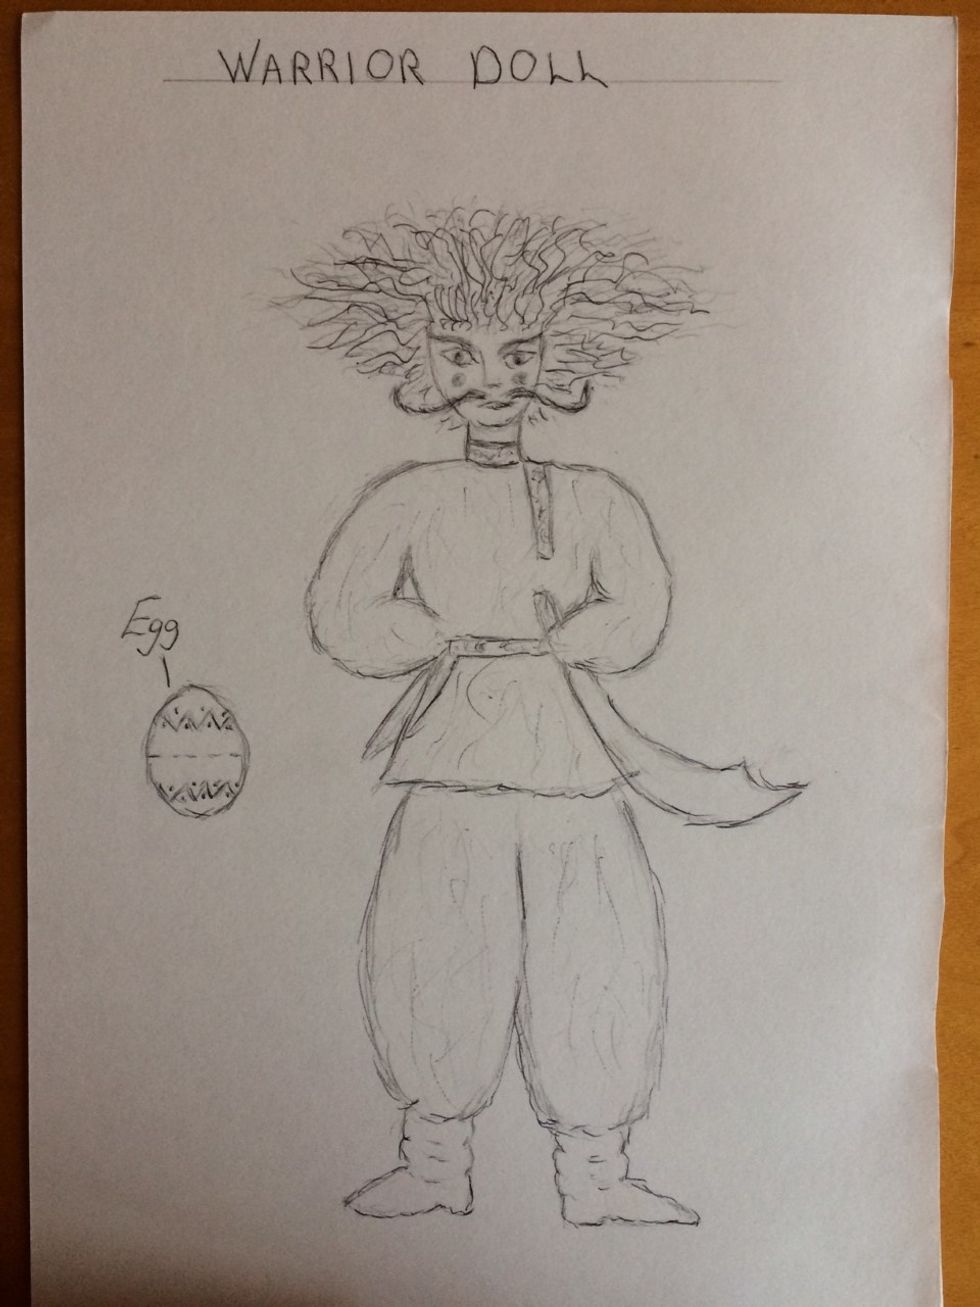 A sketch of a warrior doll and easter egg